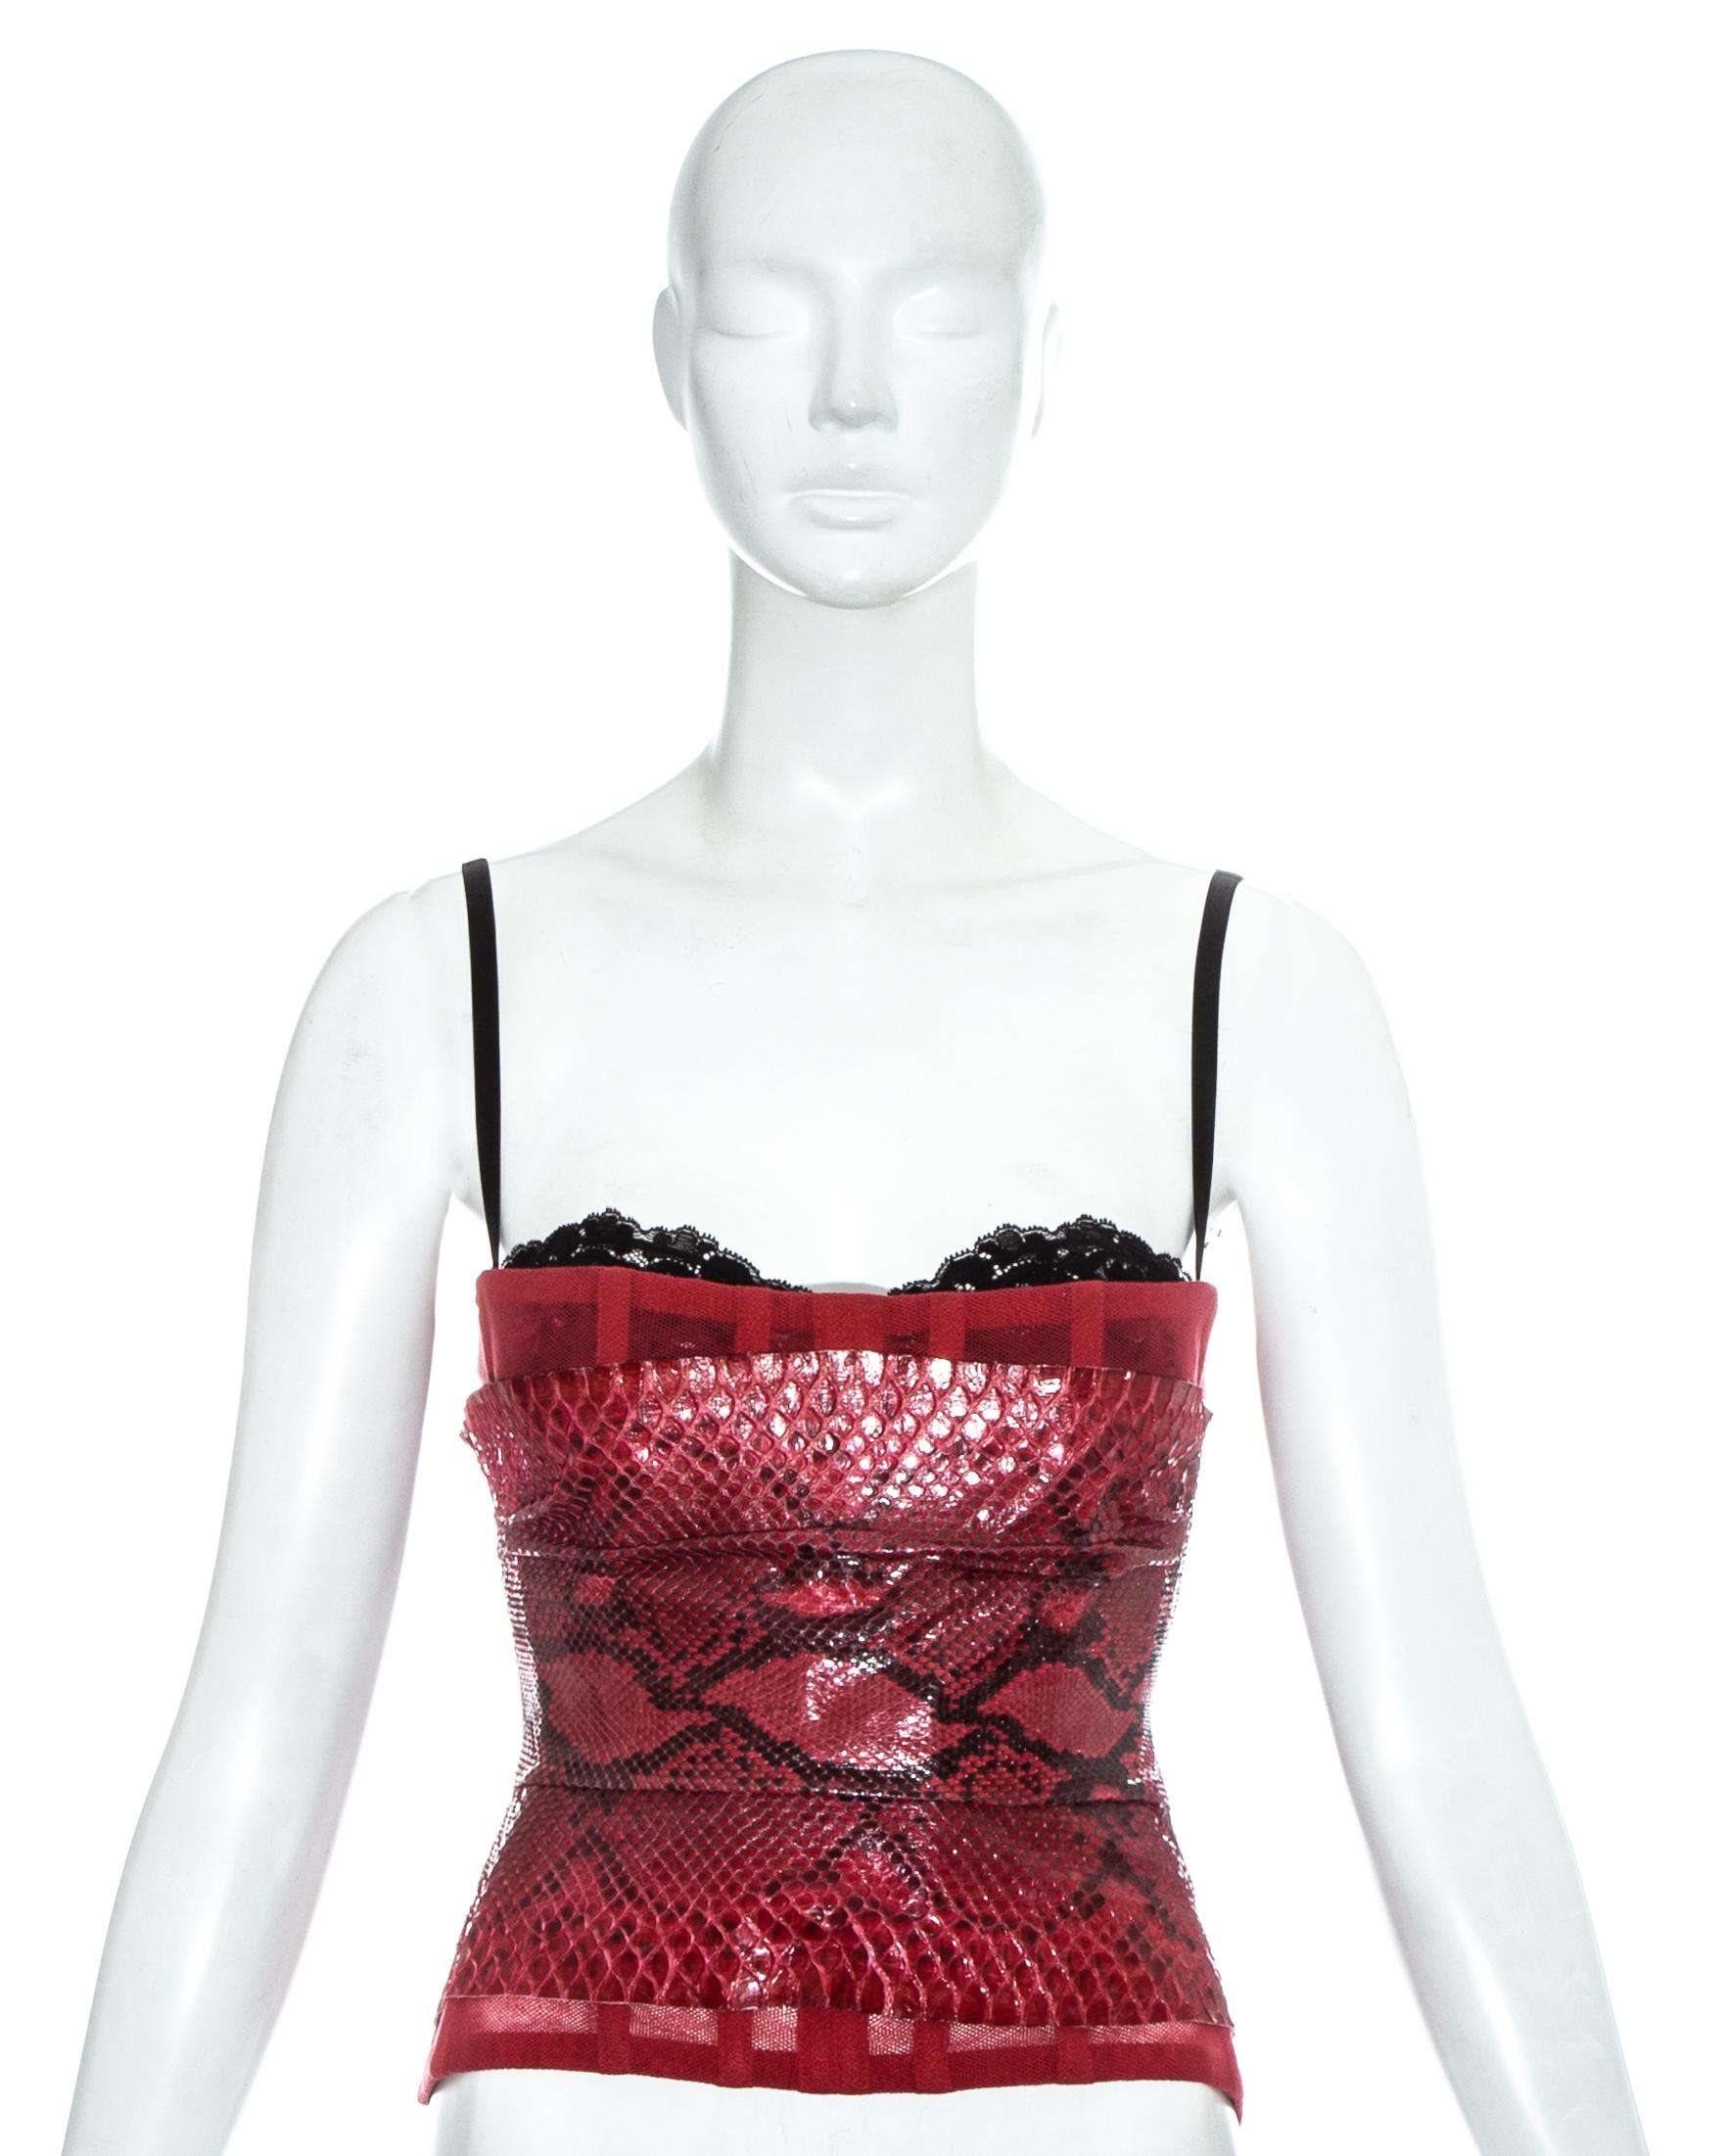 Dolce & Gabbana mesh corset with built in bra, internal boning and python overlay. 

Spring-Summer 2005